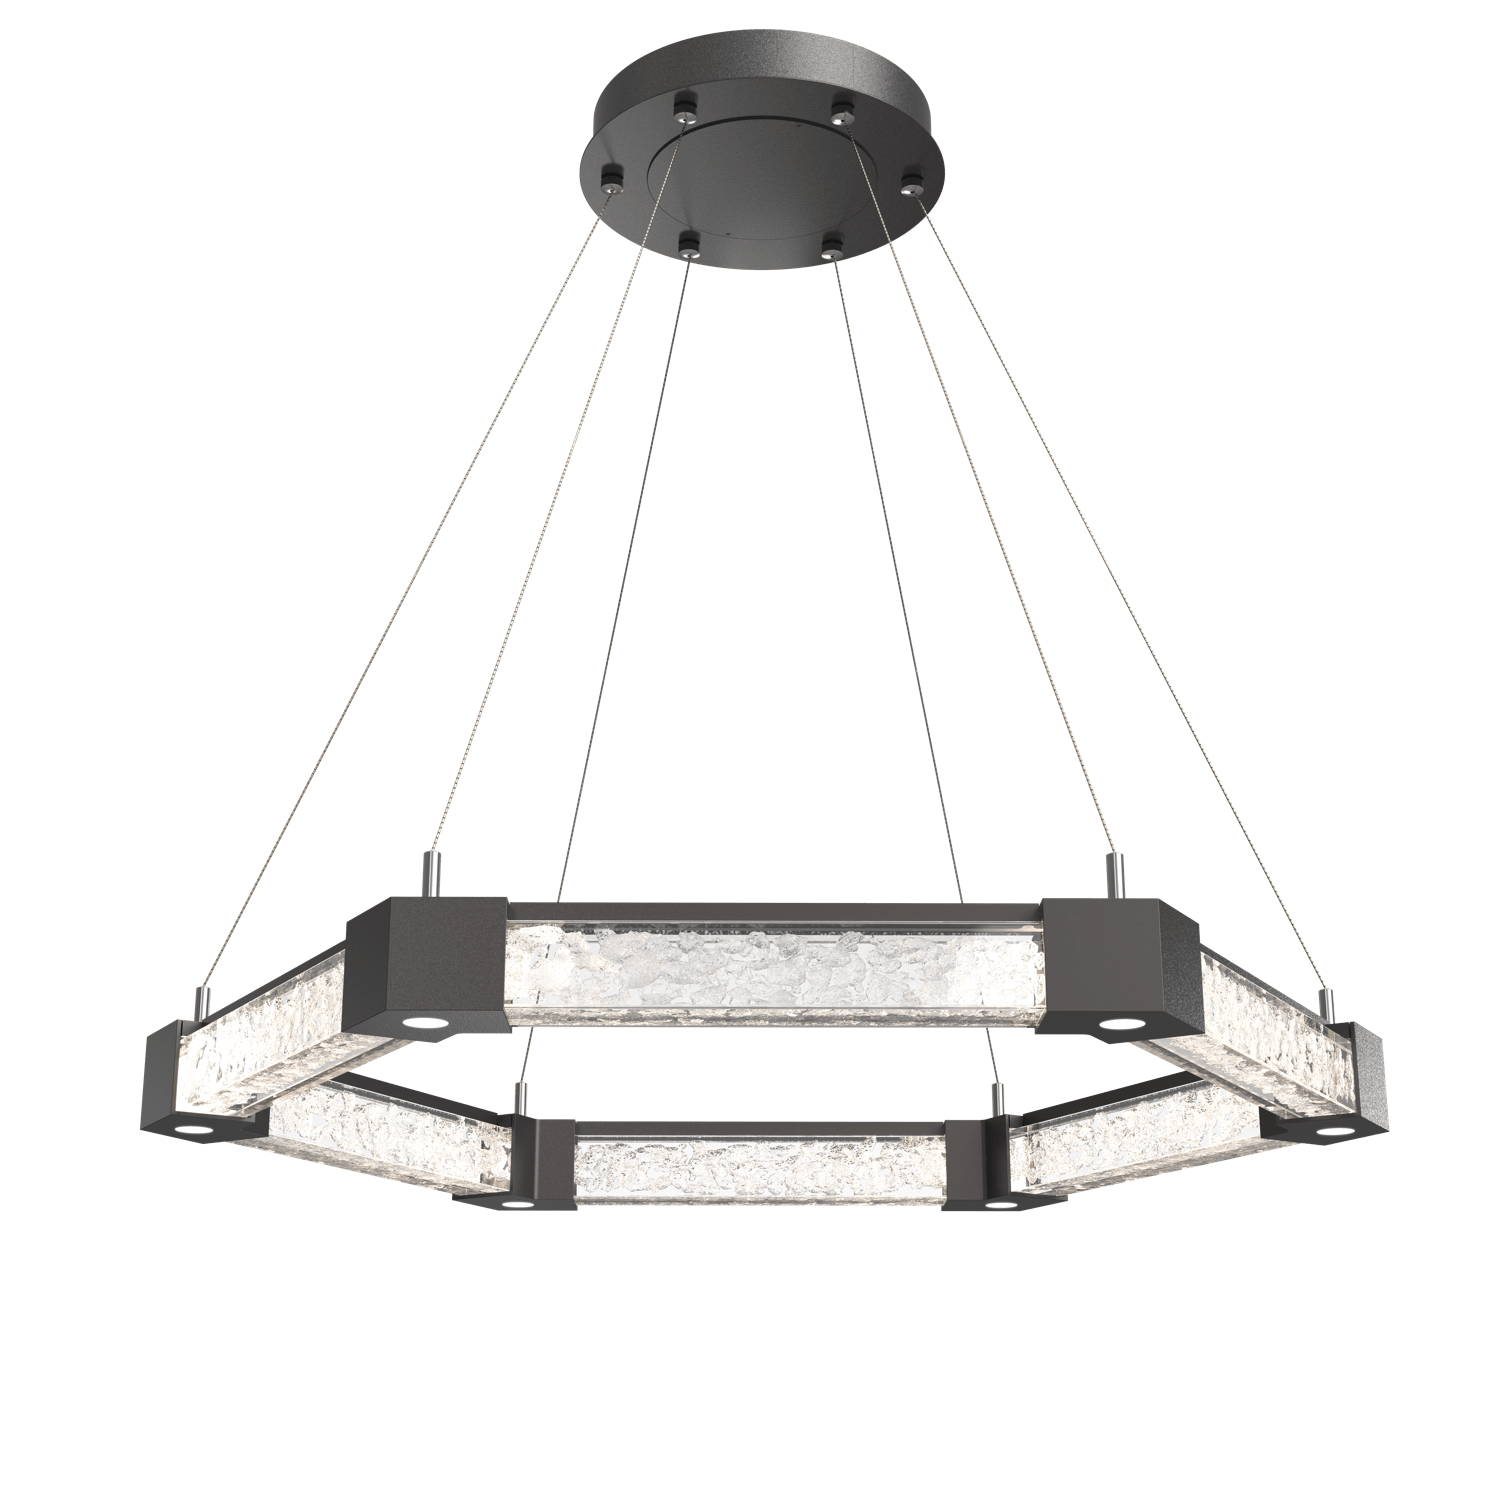 CHB0060-35-GP-GC-Hammerton-Studio-Axis-Hexagonal-Ring-Chandelier-with-Graphite-finish-and-clear-cast-glass-and-LED-lamping